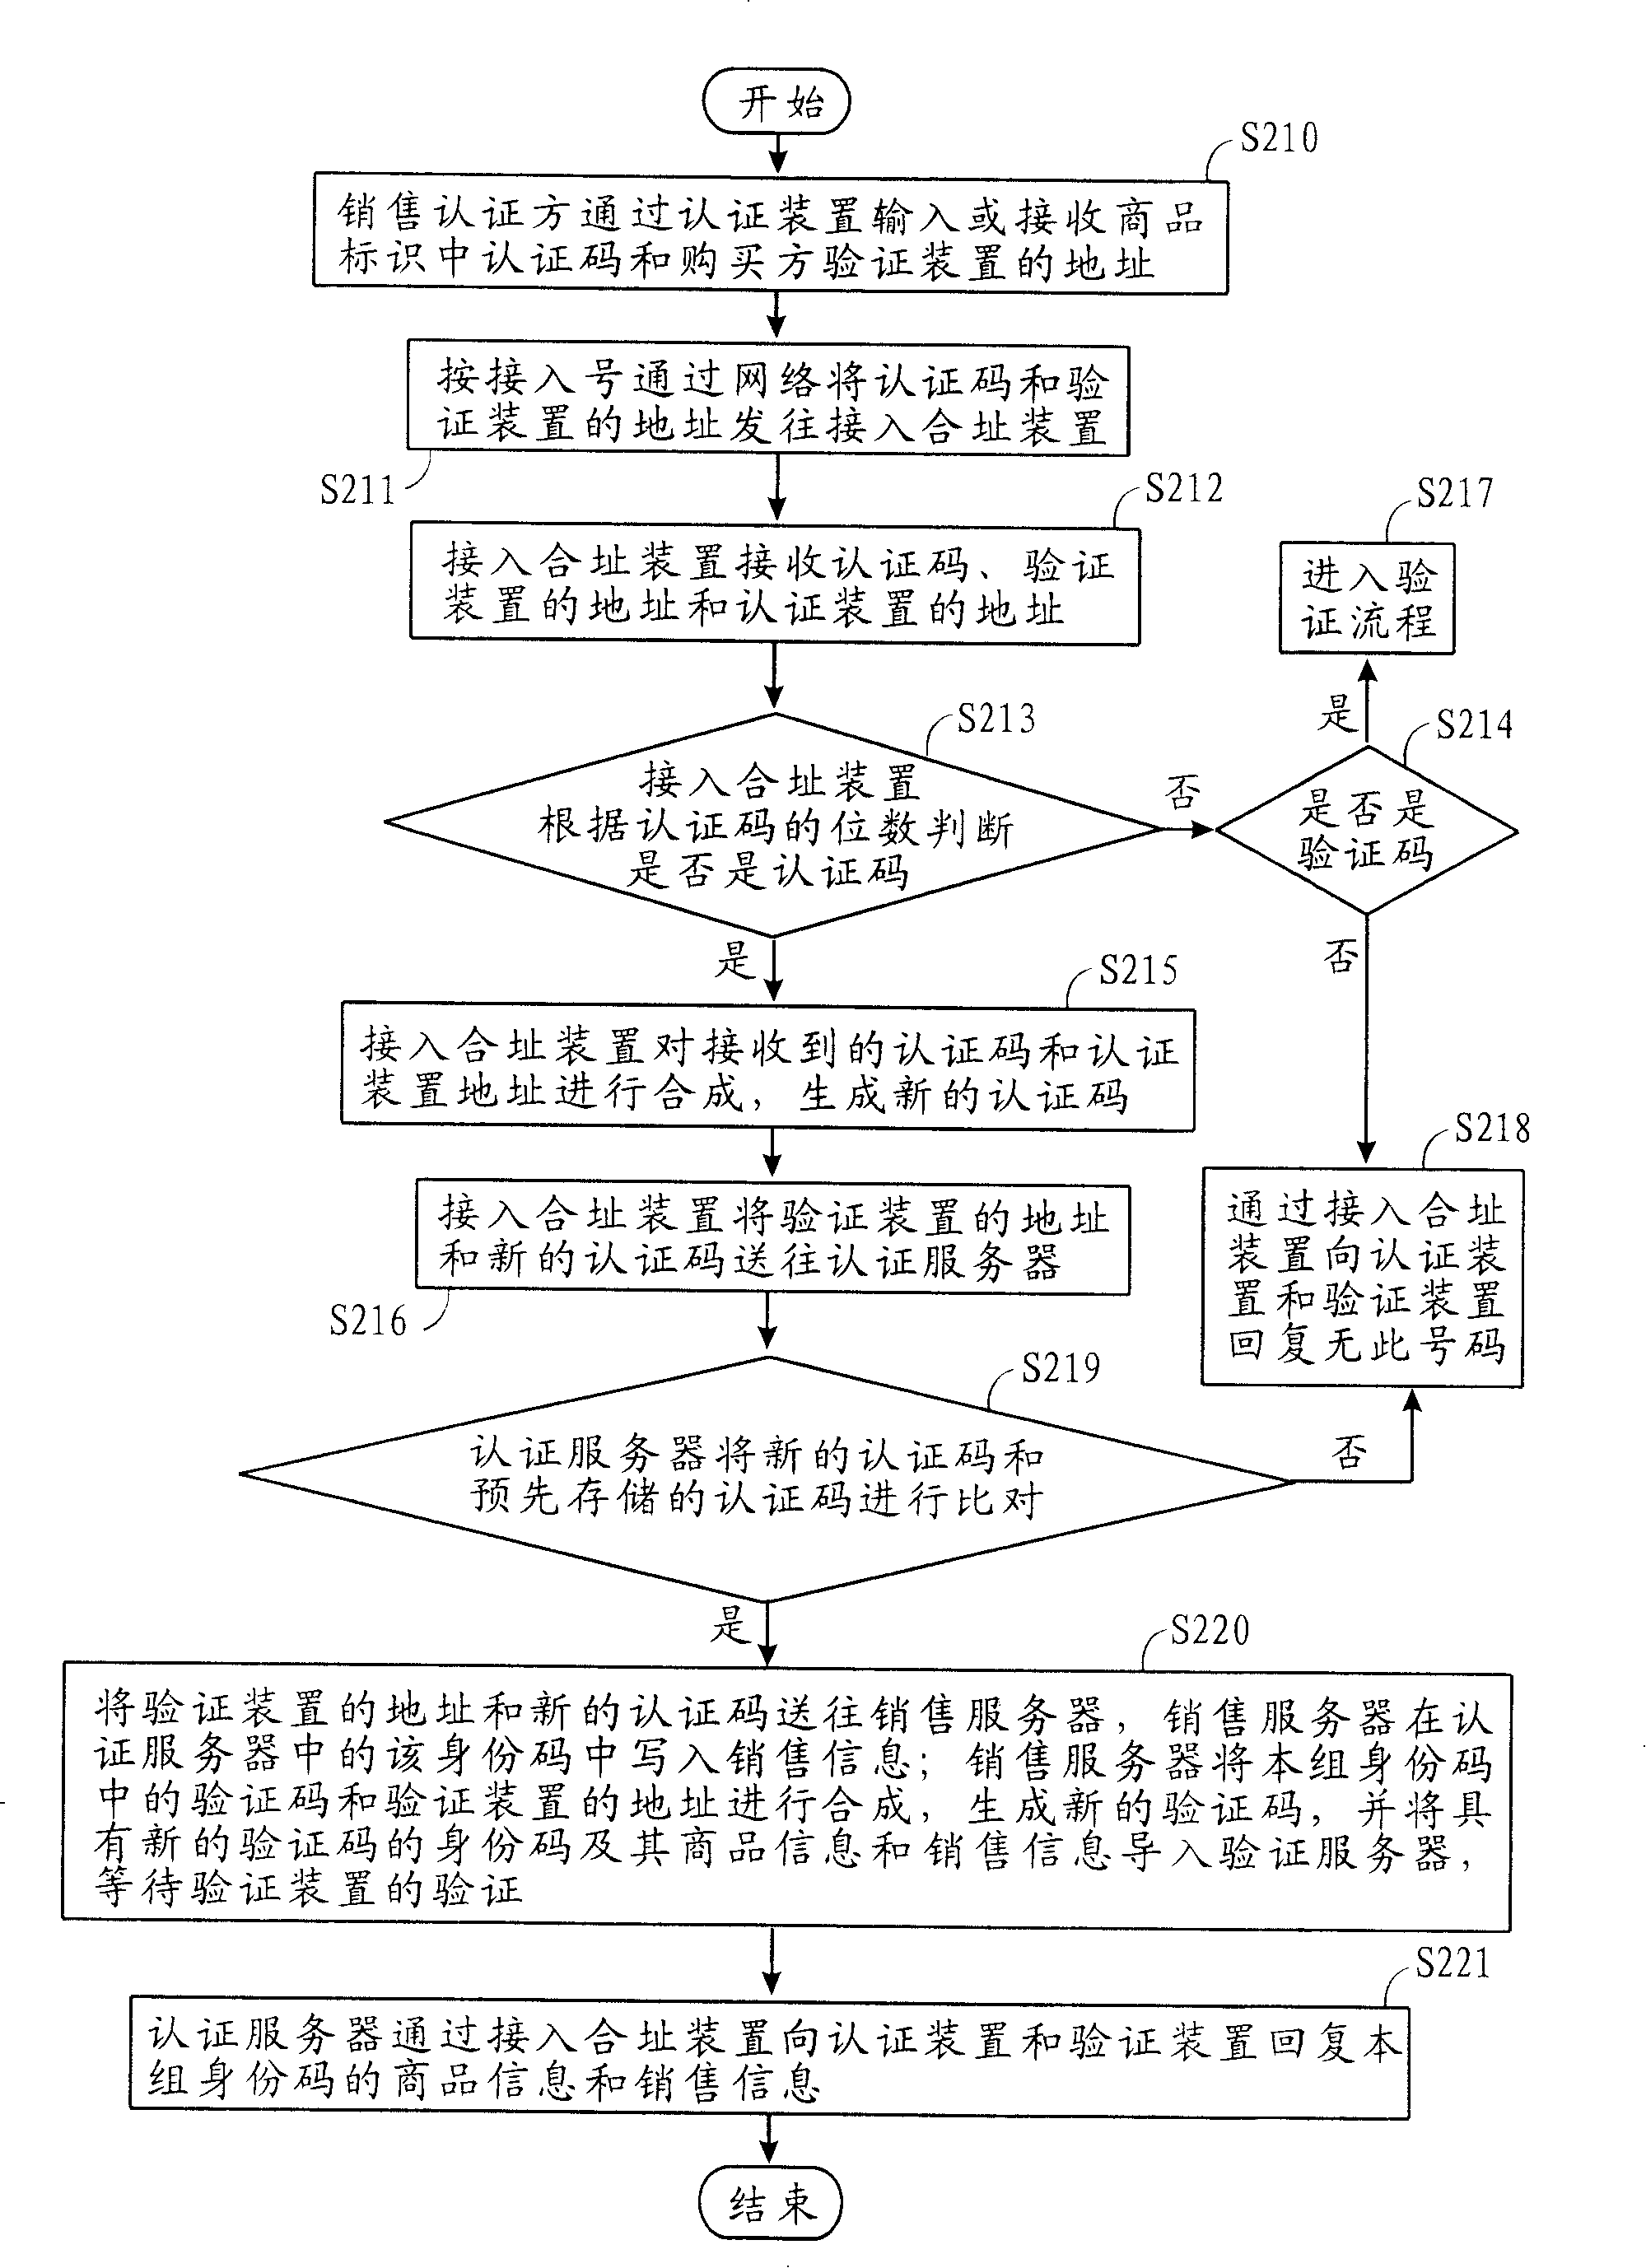 Combined address identification system and method, and automatic identification device